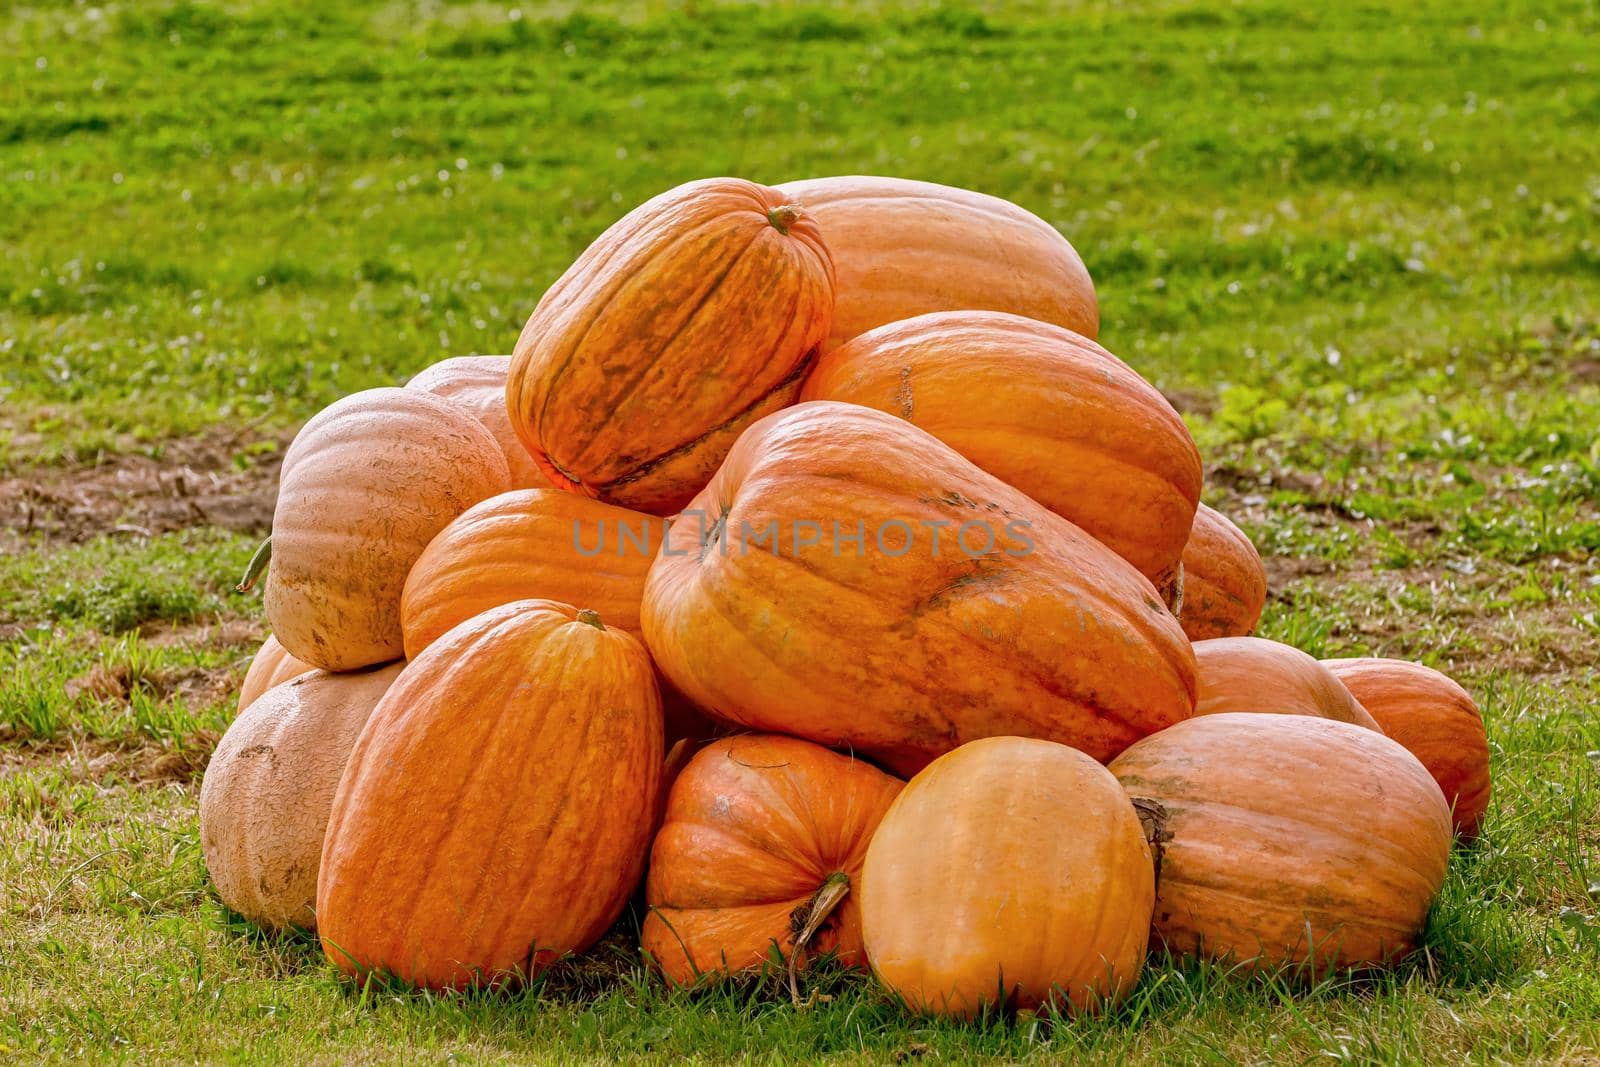 Harvested Crop Pumpkins on the Lawn